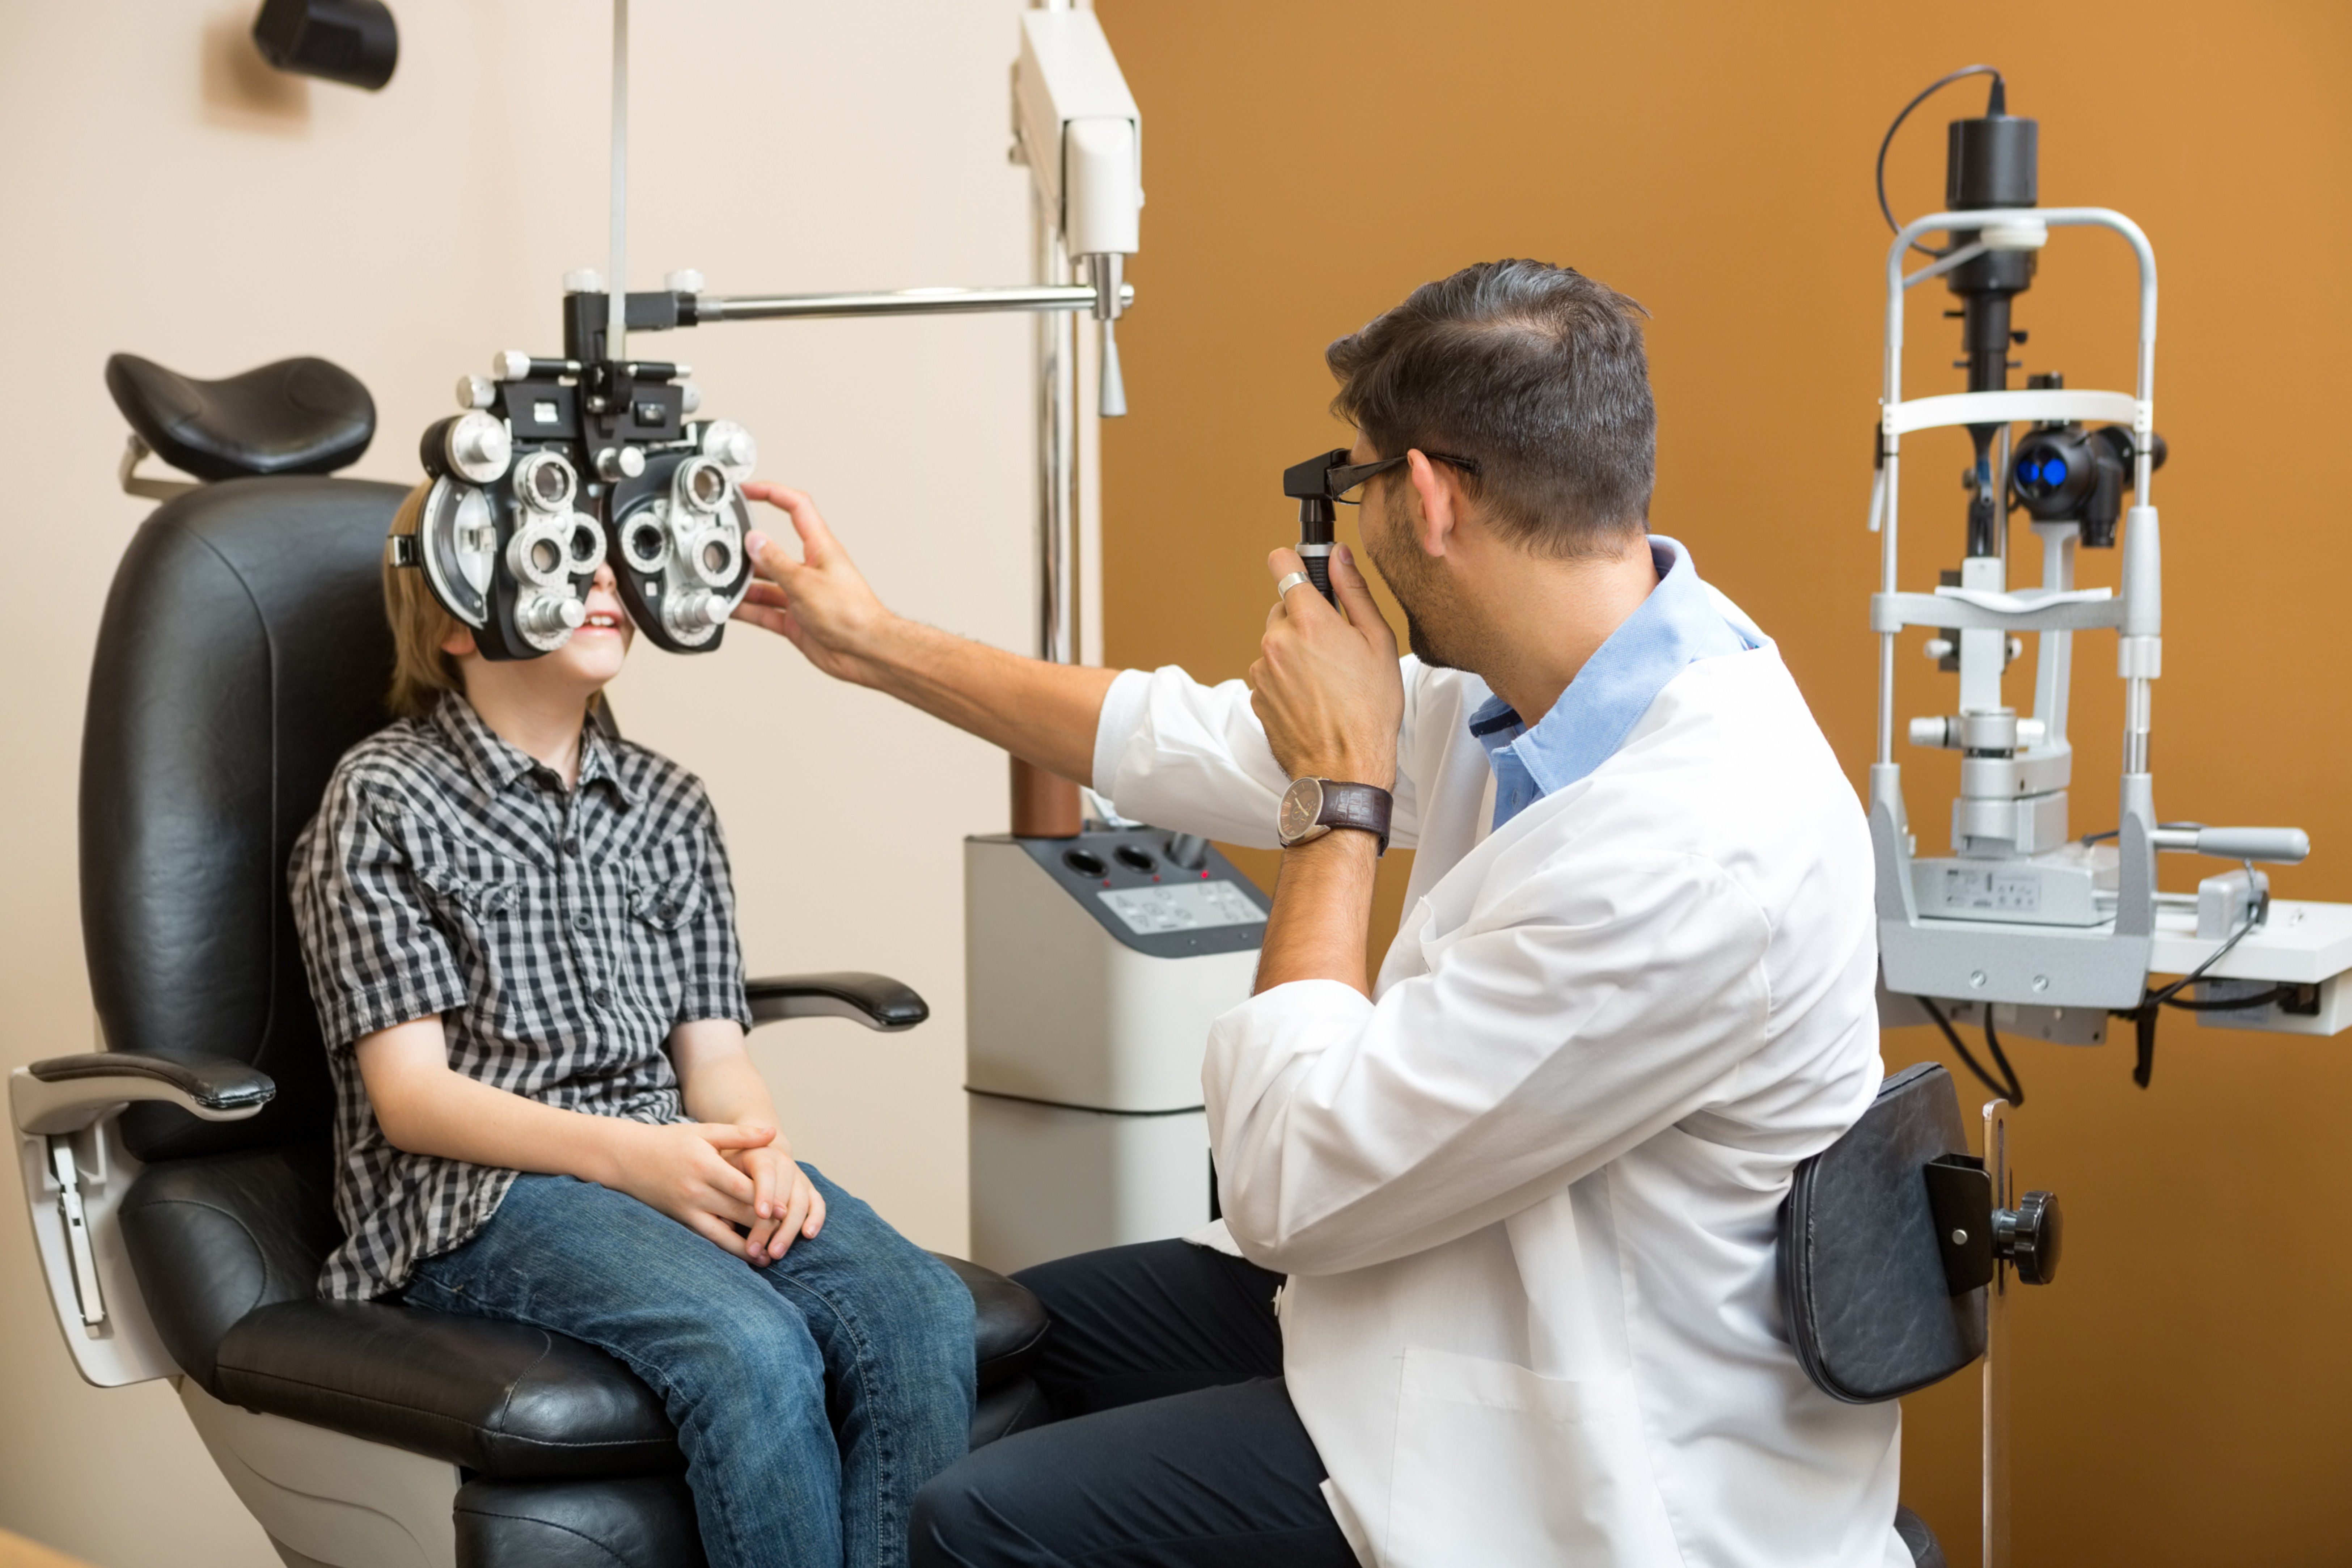 How Eye Exams Can Help Your Child in School